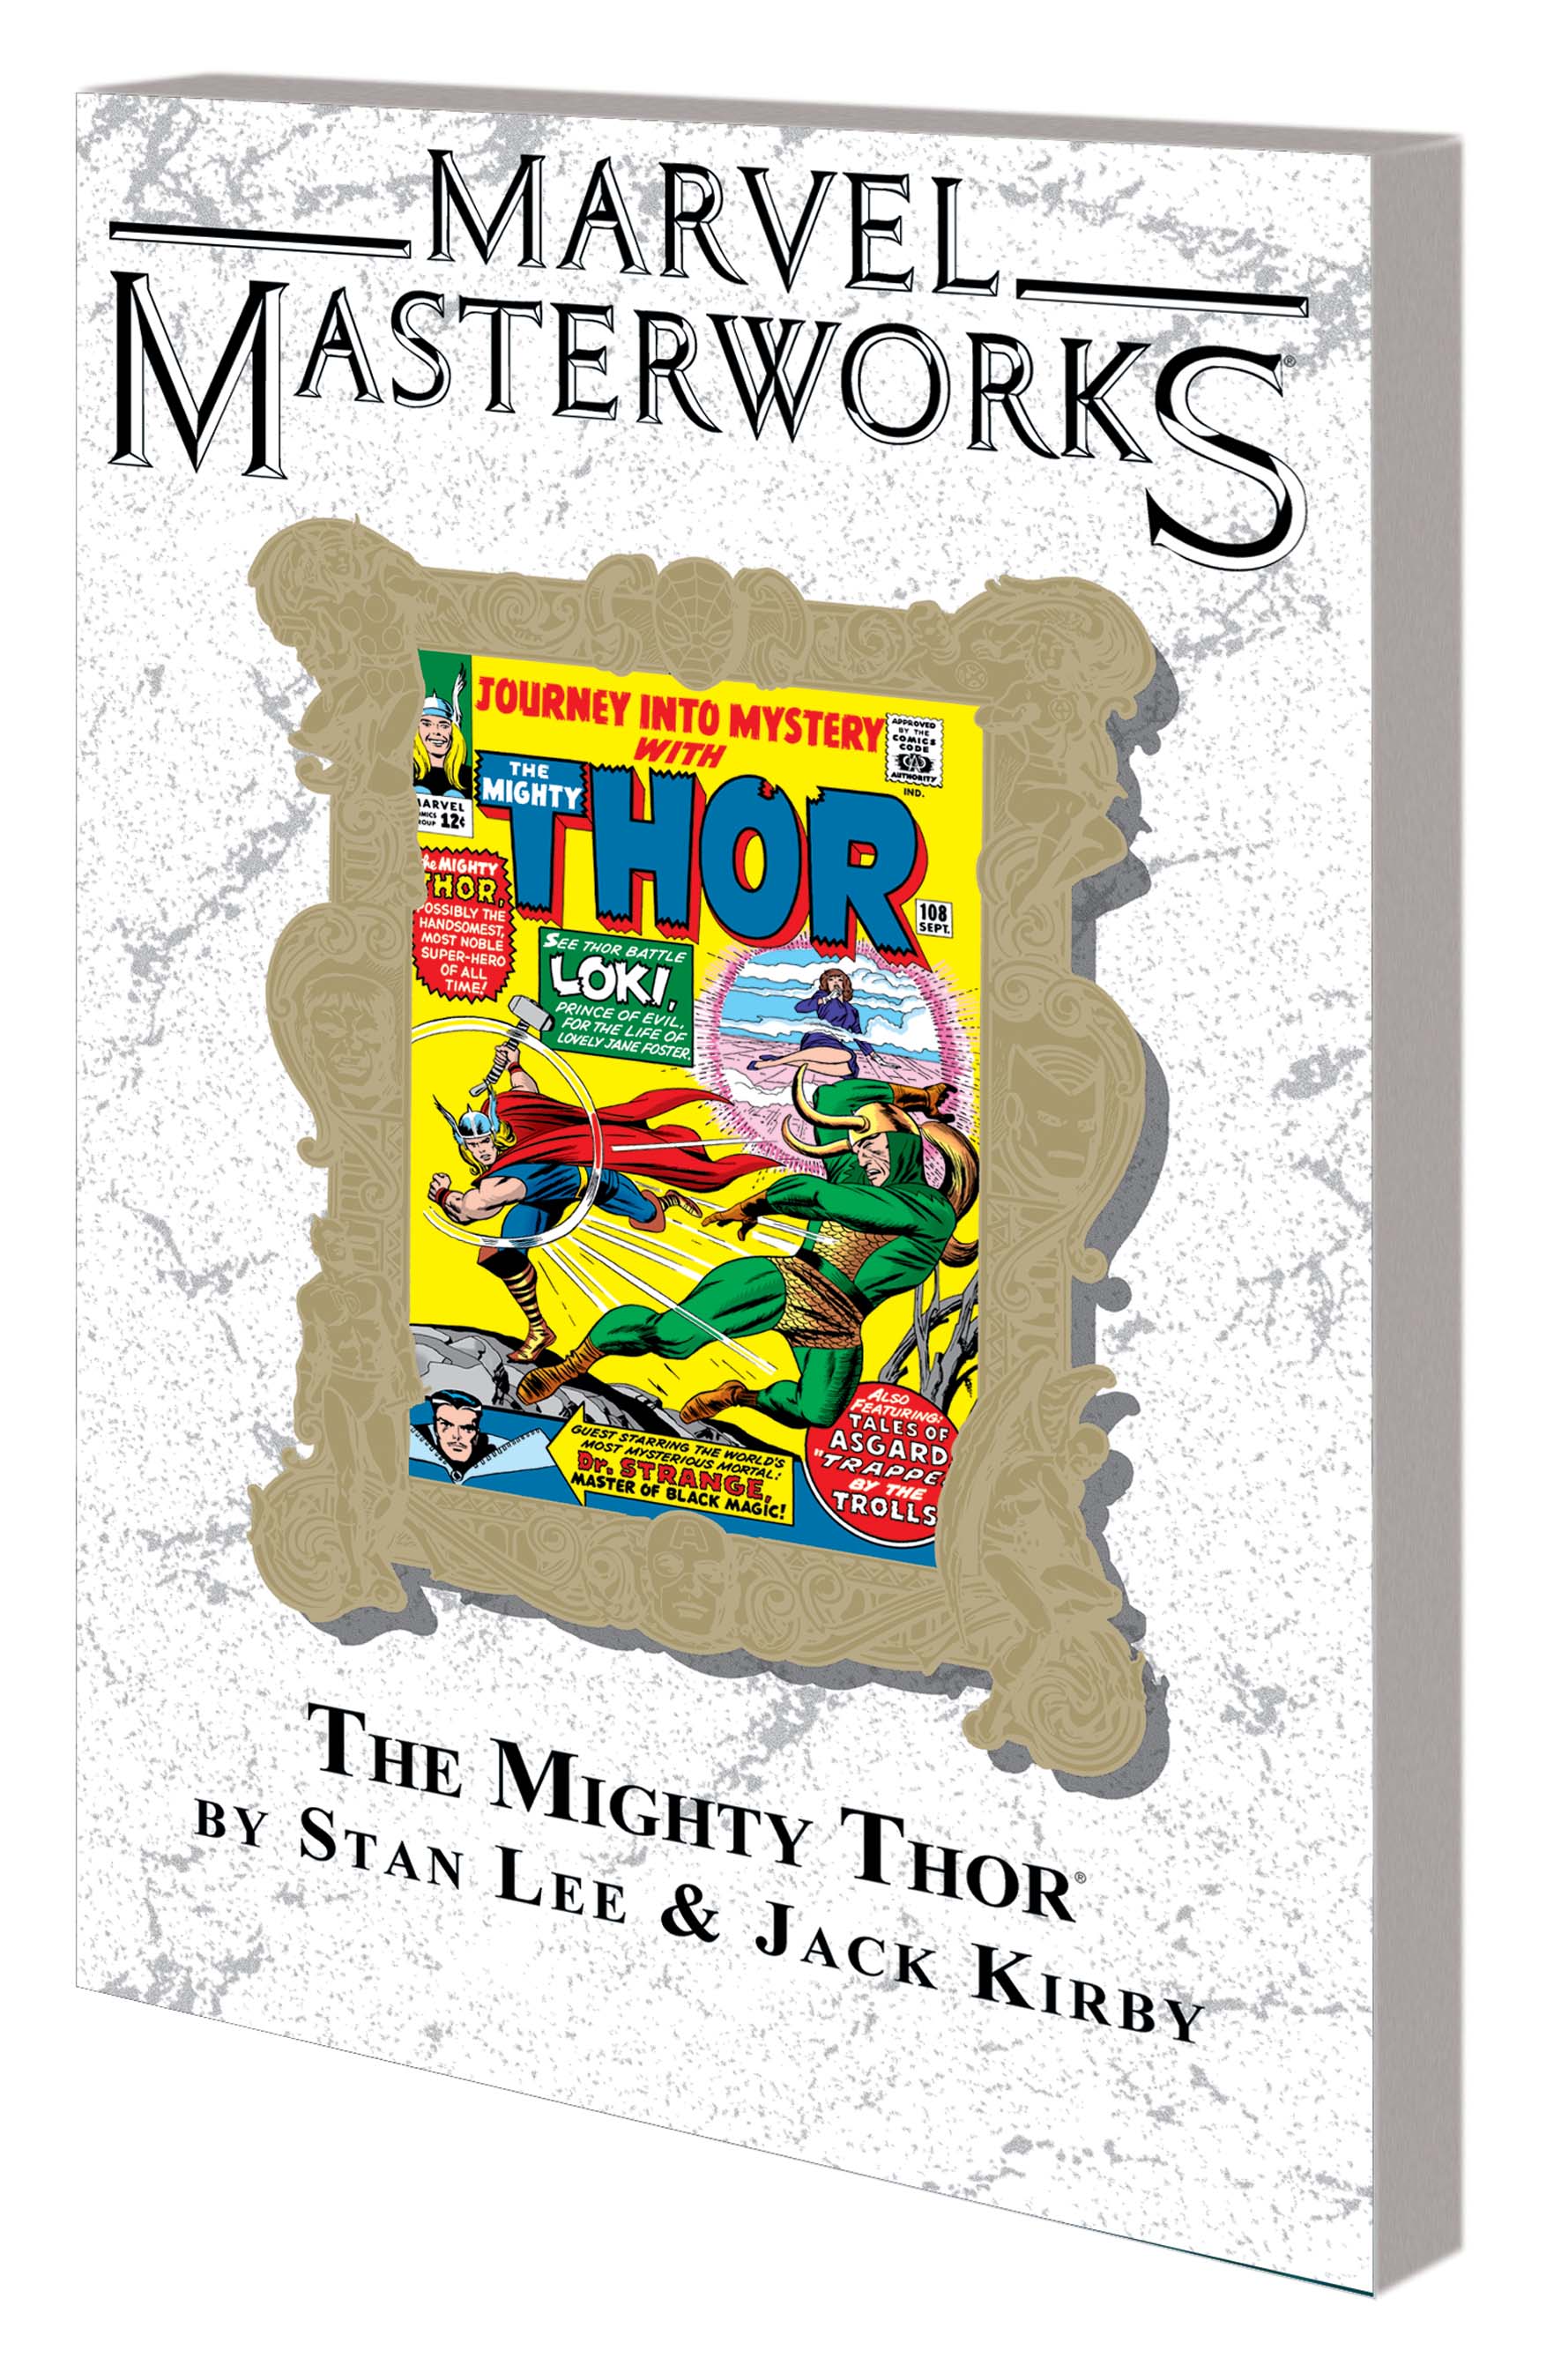 MARVEL MASTERWORKS: THE MIGHTY THOR VOL. 2 TPB VARIANT [DM ONLY] (Trade Paperback)